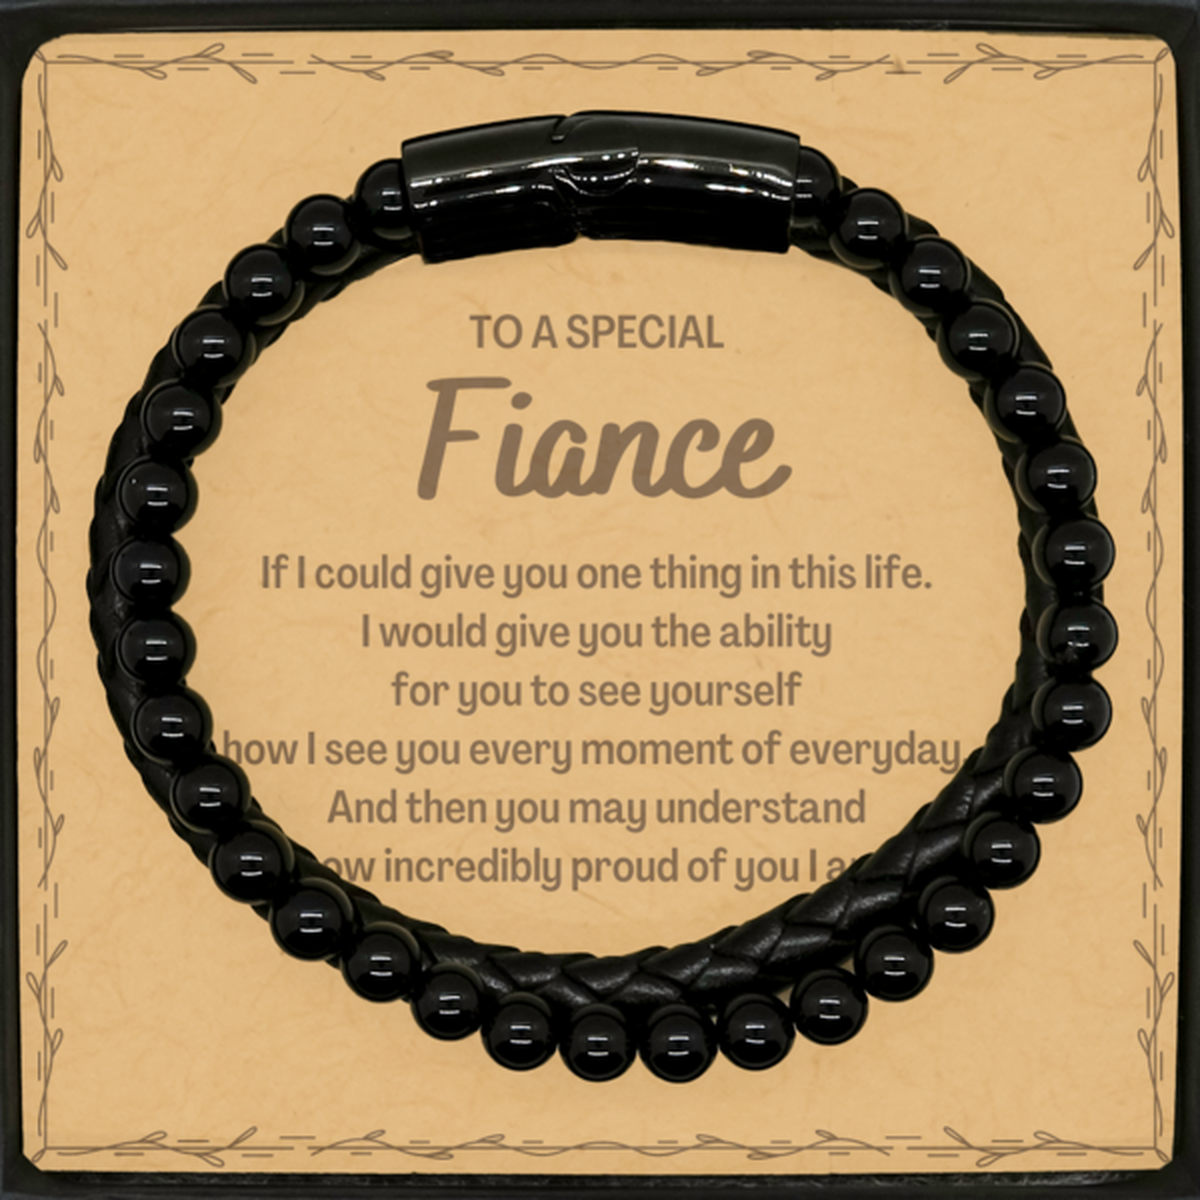 To My Fiance Stone Leather Bracelets, Gifts For Fiance Message Card, Inspirational Gifts for Christmas Birthday, Epic Gifts for Fiance To A Special Fiance how incredibly proud of you I am